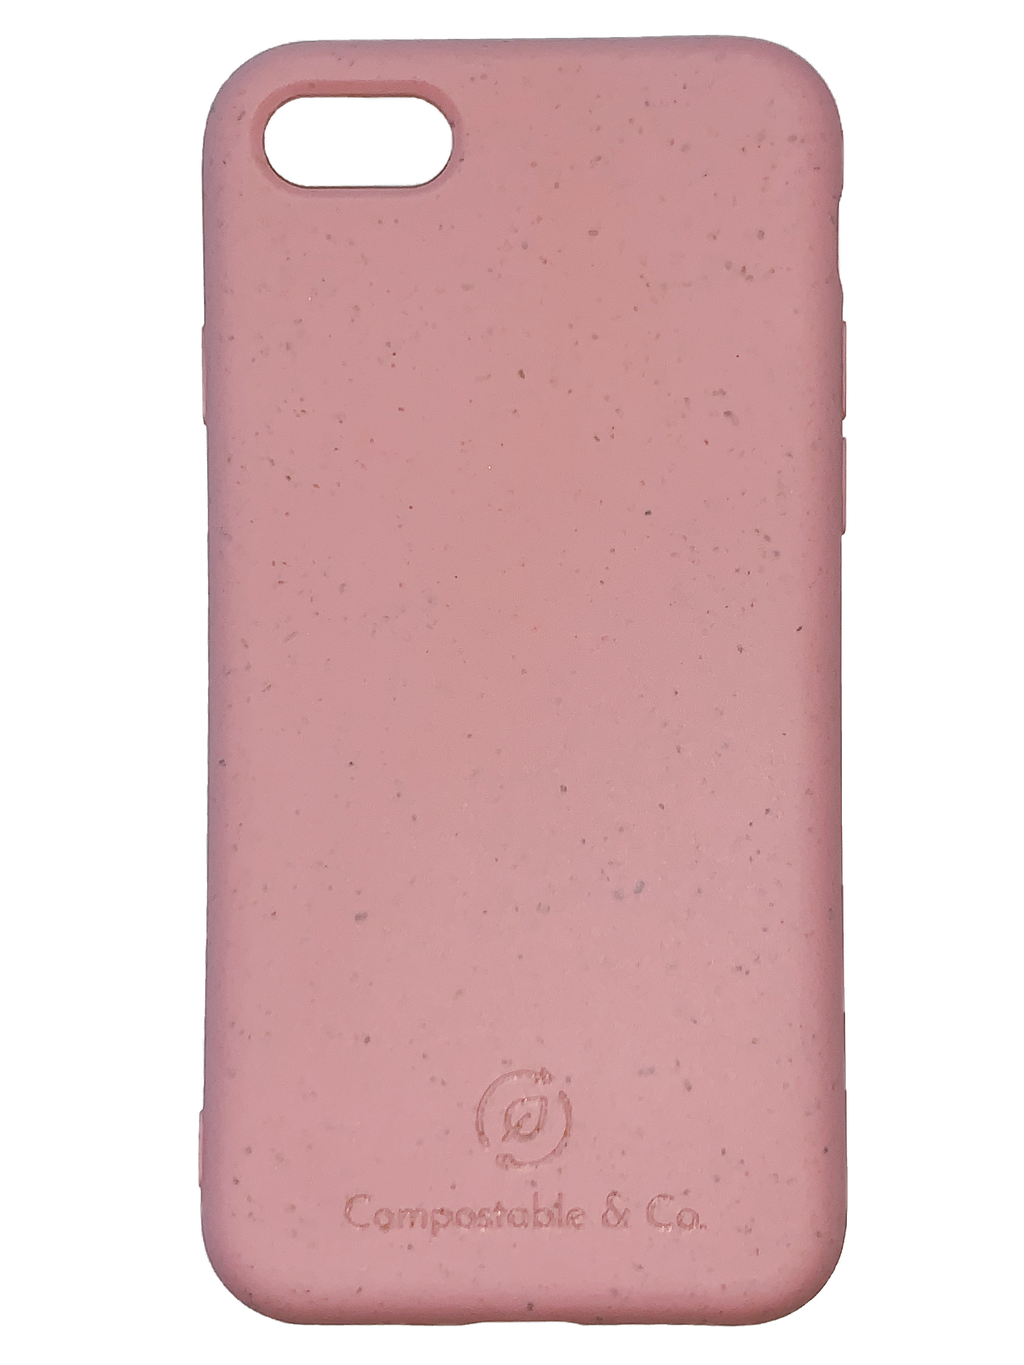 Compostable & Co. iPhone 7 / 8 / SE 2020 pink biodegradable phone case